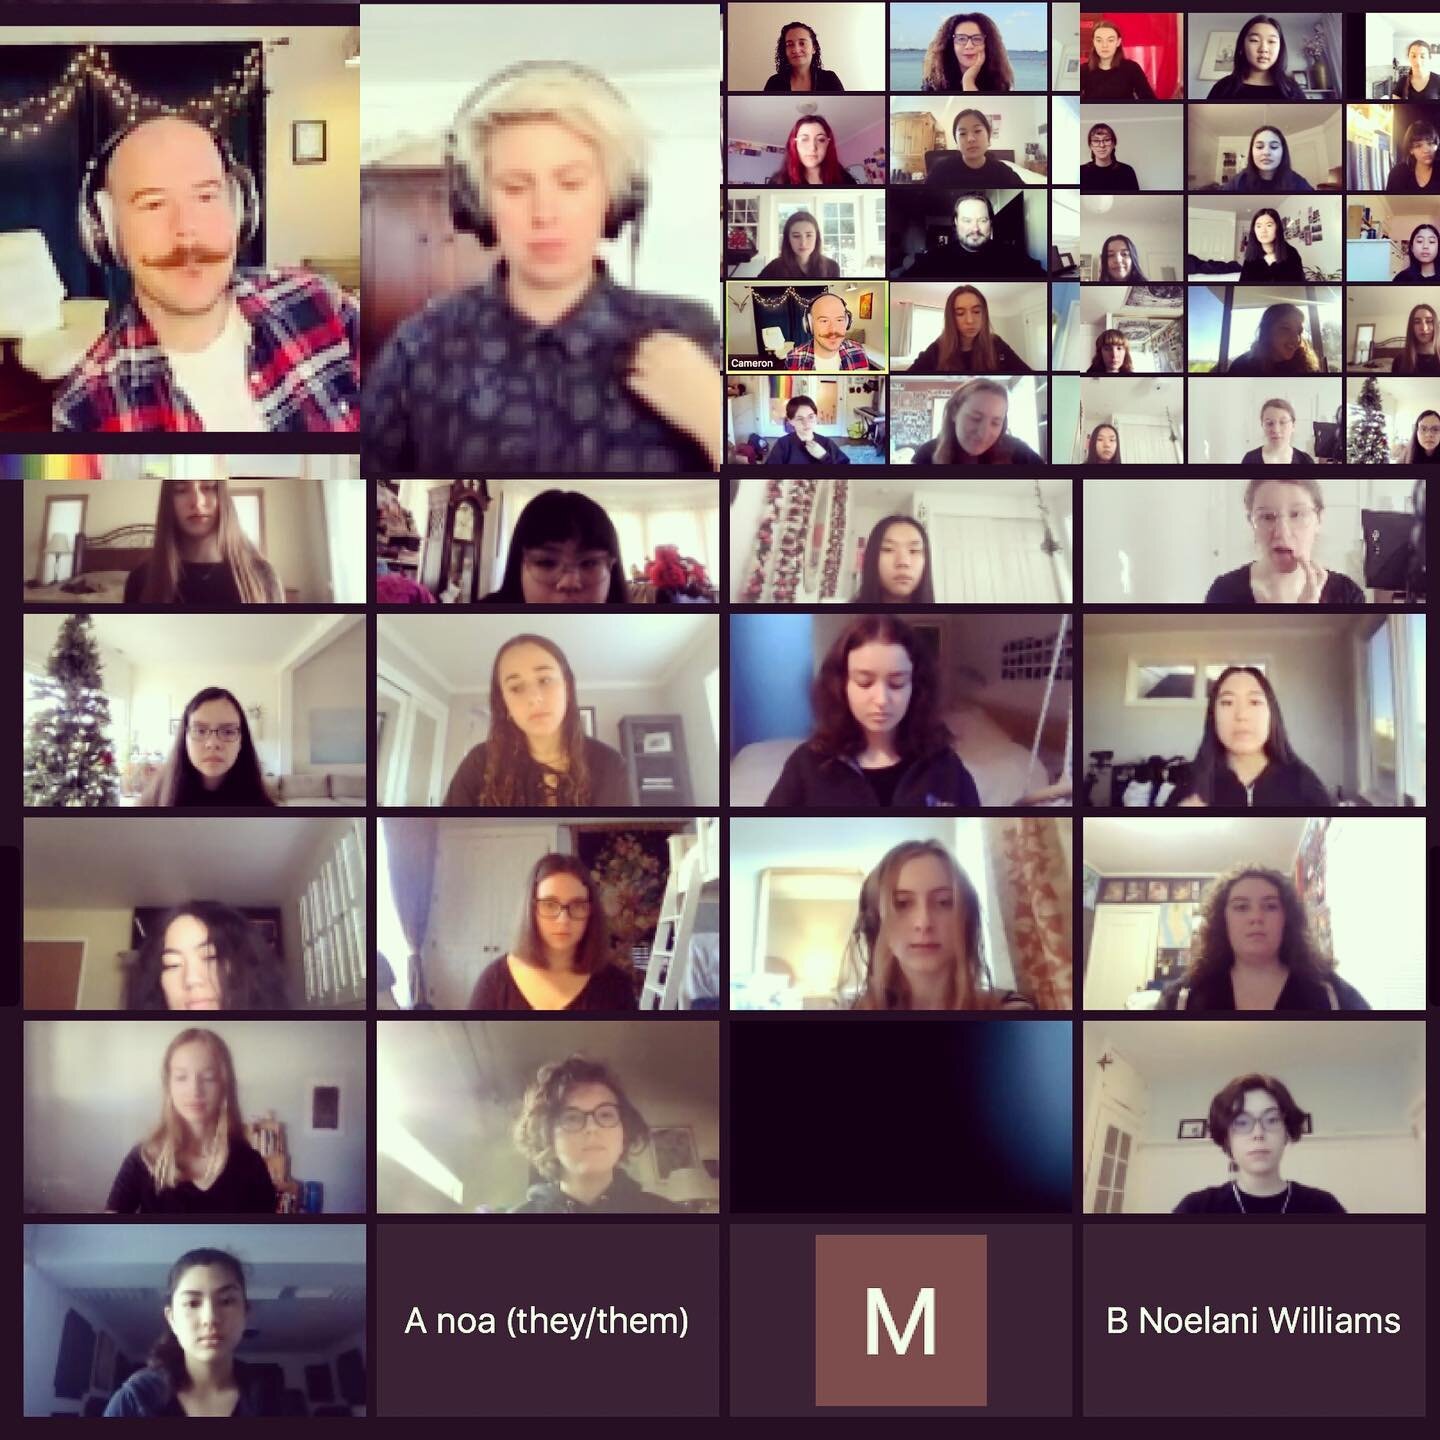 Good Morning! We start the day with a masterclass/workshop with the wonderful @roomfulofteeth 😊 We are so lucky to have with us Cameron Beauchamp and @ginny_kelsey Today we are going to learn about yodeling! #masterclass #onlinemasterclass #onlinemu